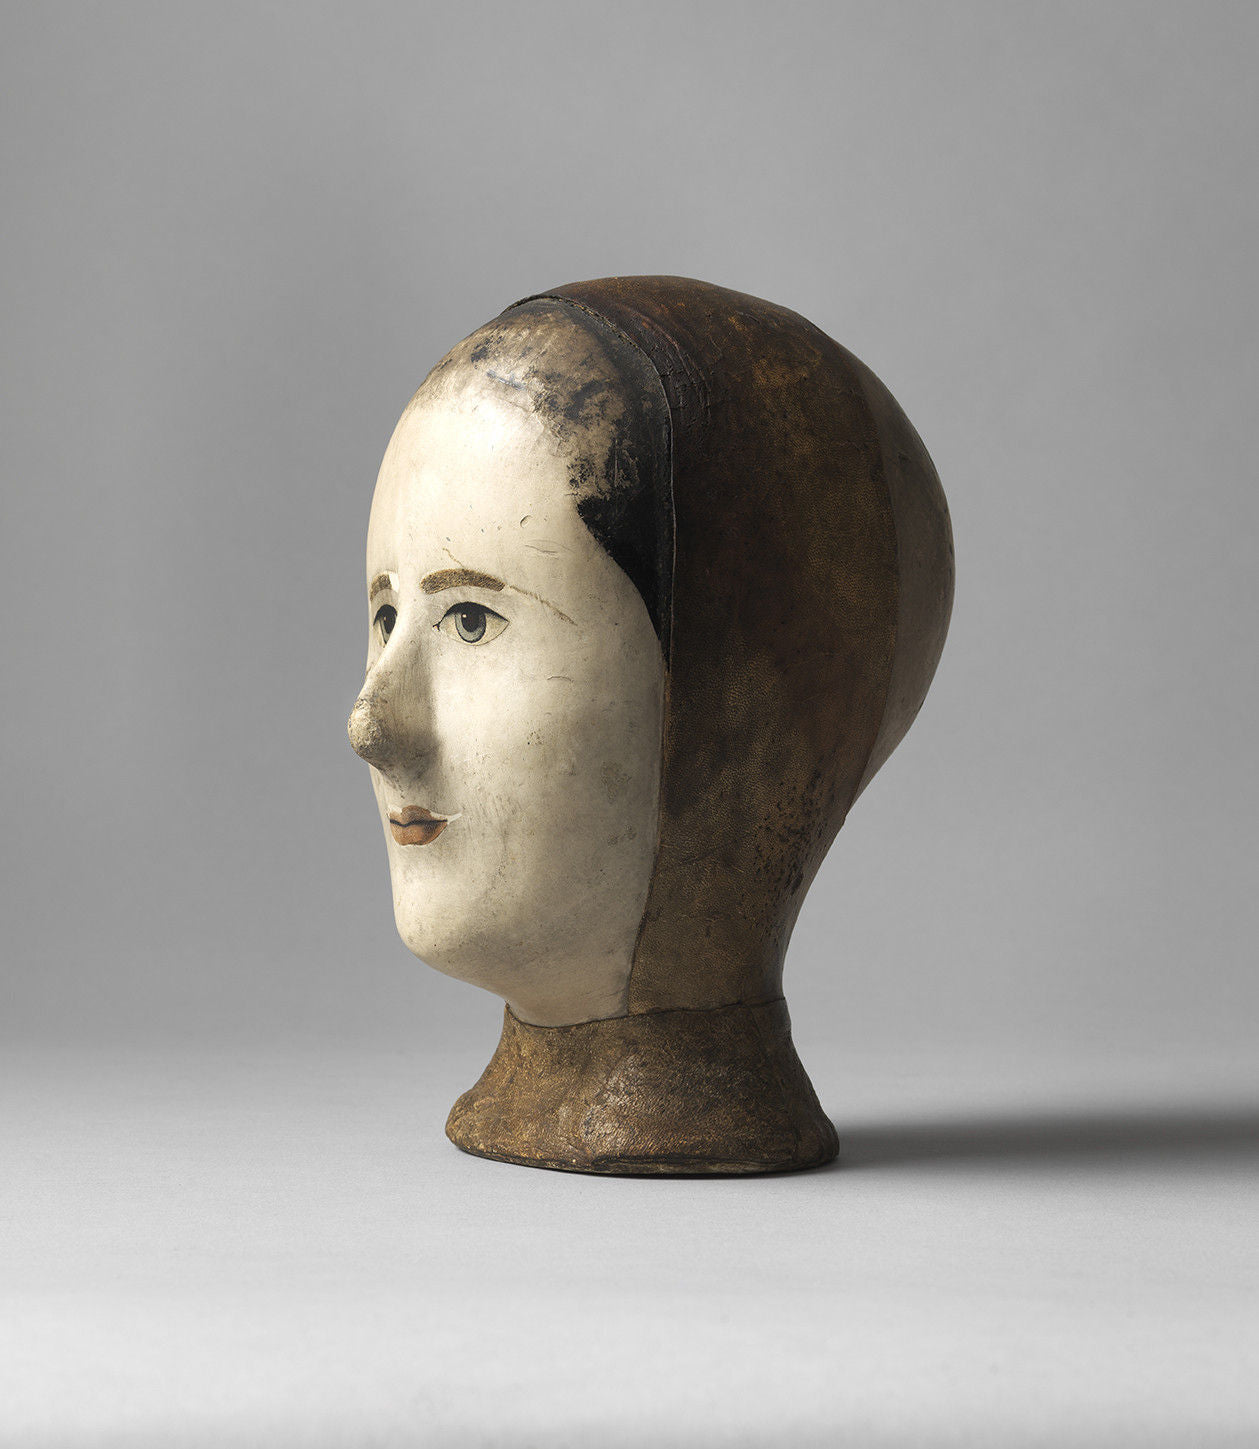 Particularly Fine and Sensitive Early Milliner’s Head 